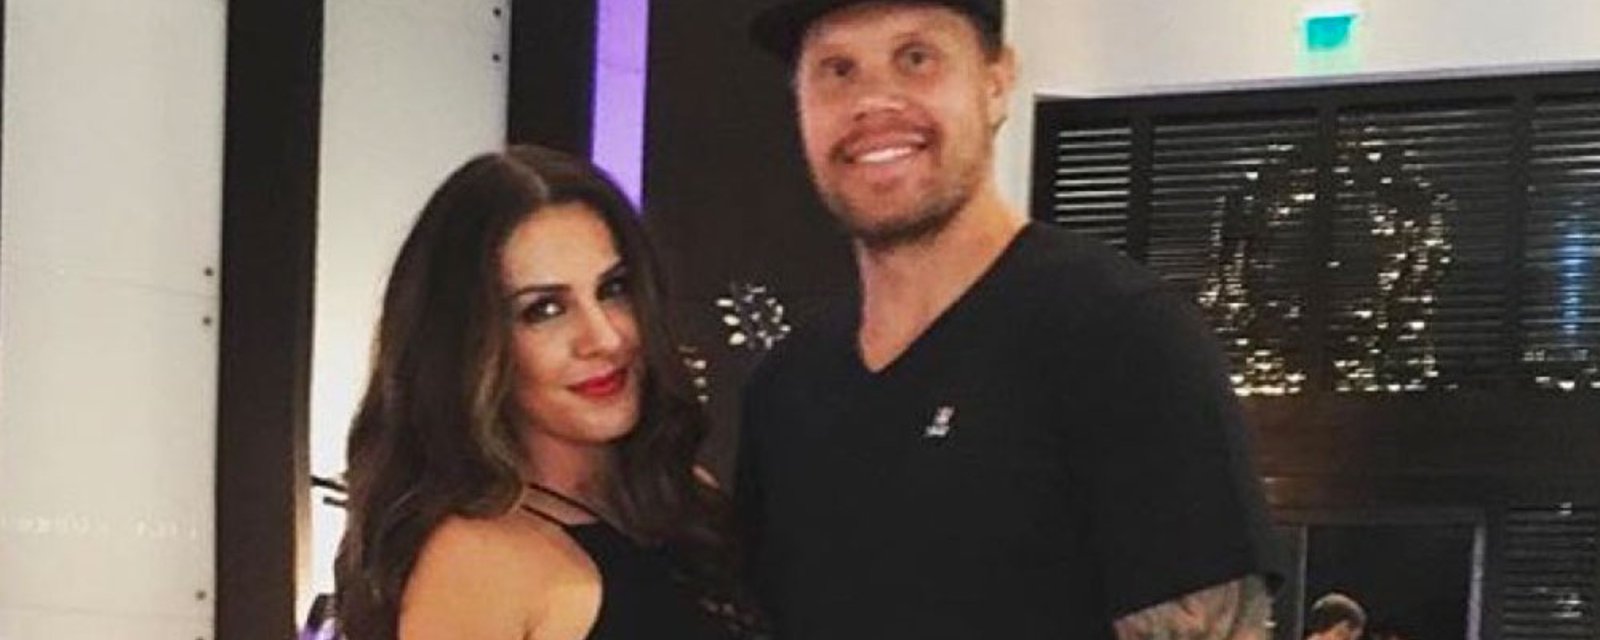 Jokinen’s wife calls out Panthers’ embarrassing display case “honouring” her husband 